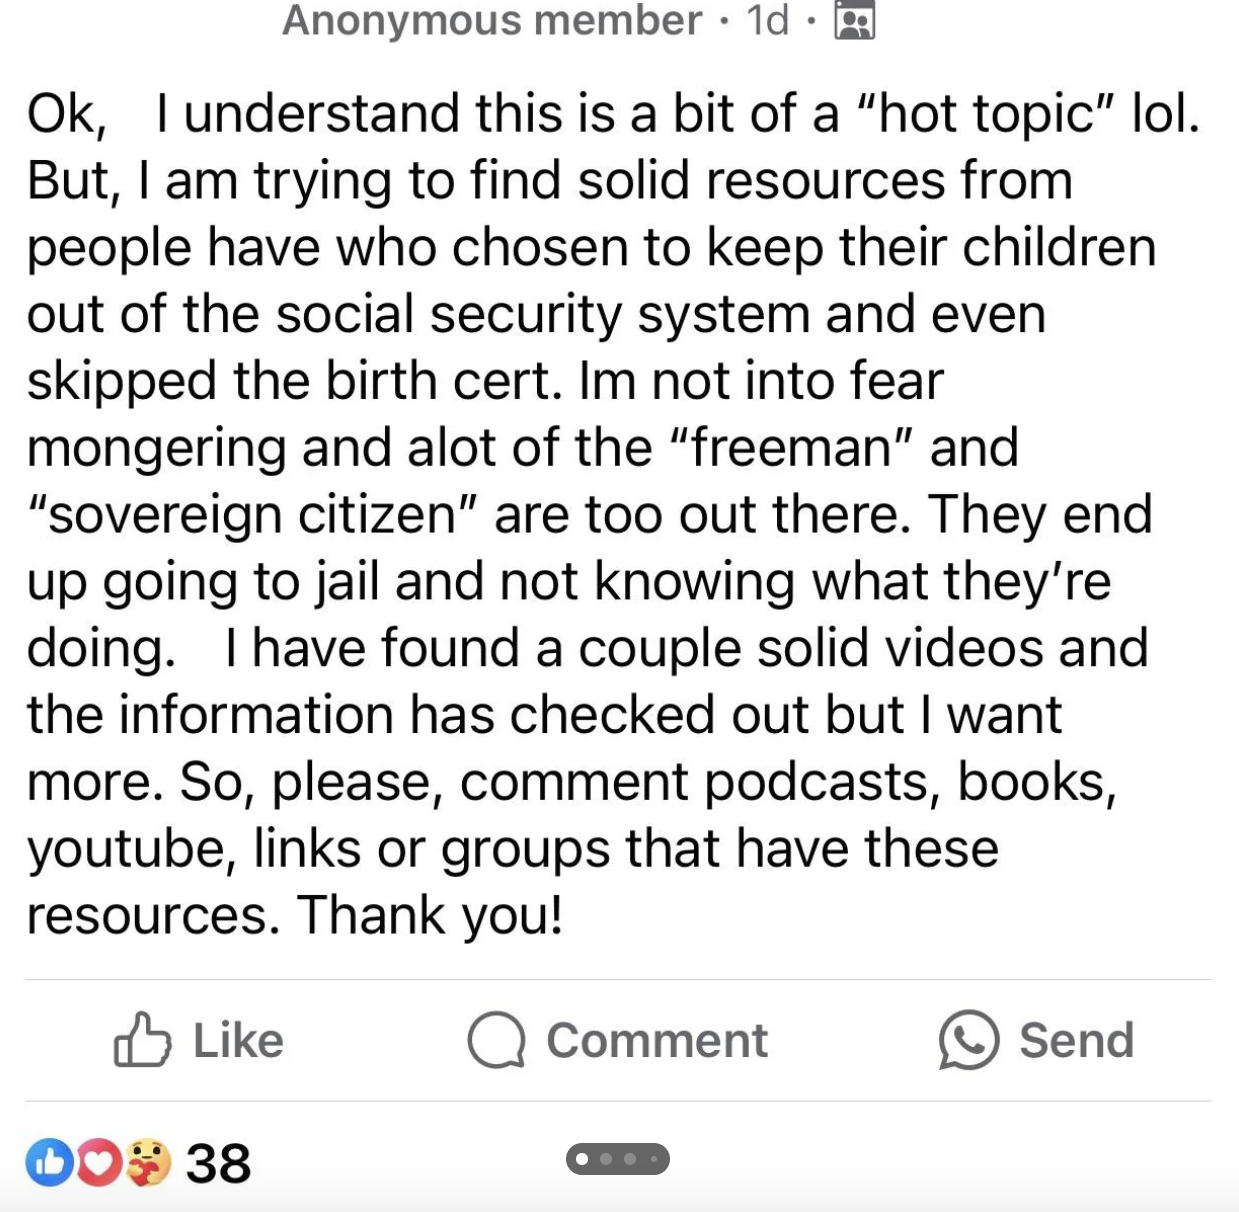 social media post where a user asks about systems and consequences related to birth certificates and sovereignty for their kid